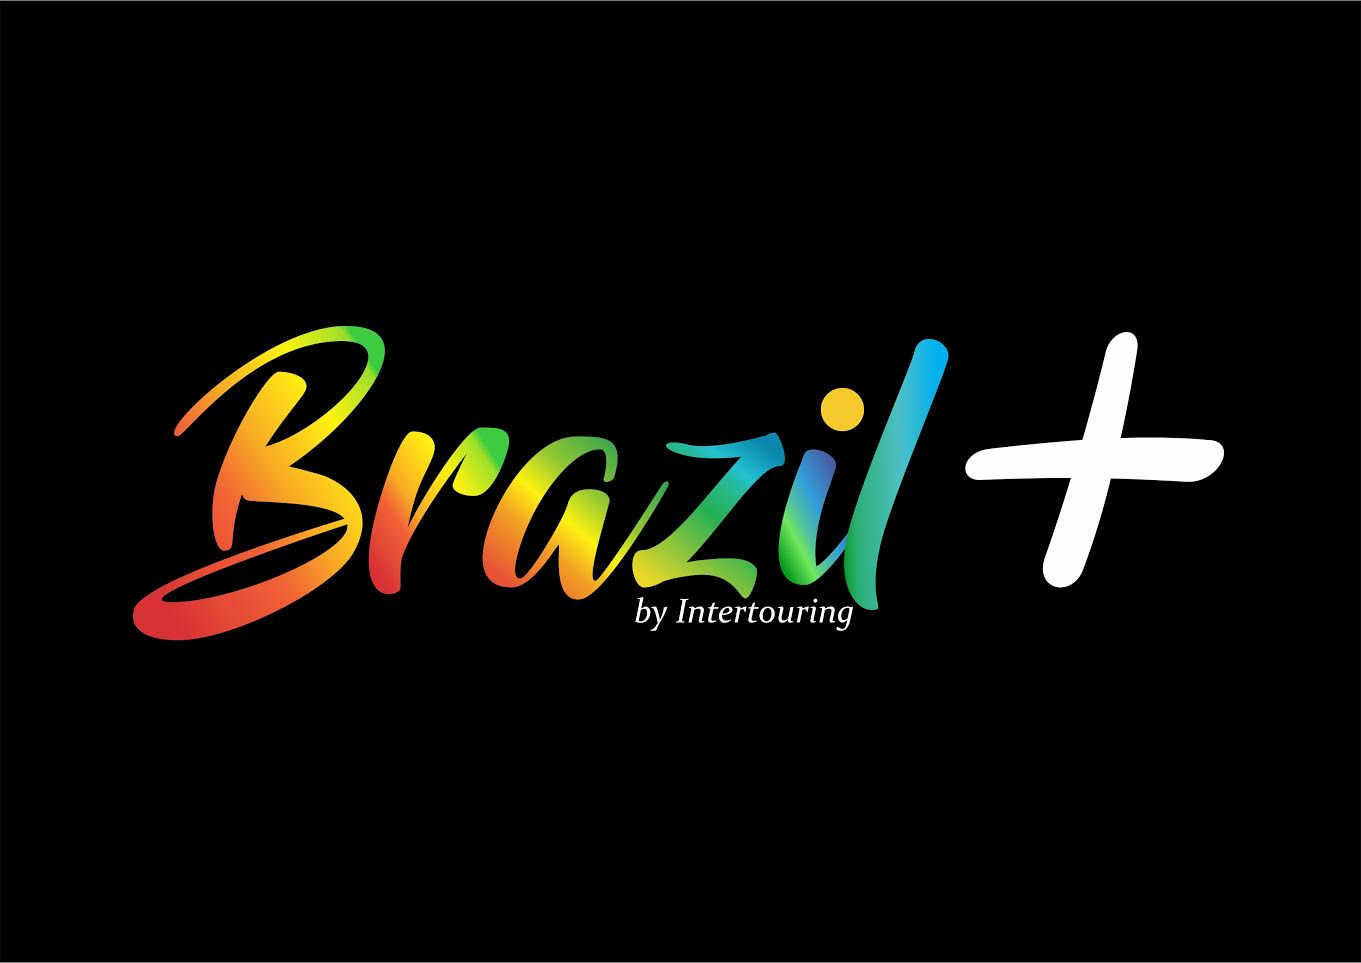 BRAZIL+ by Intertouring